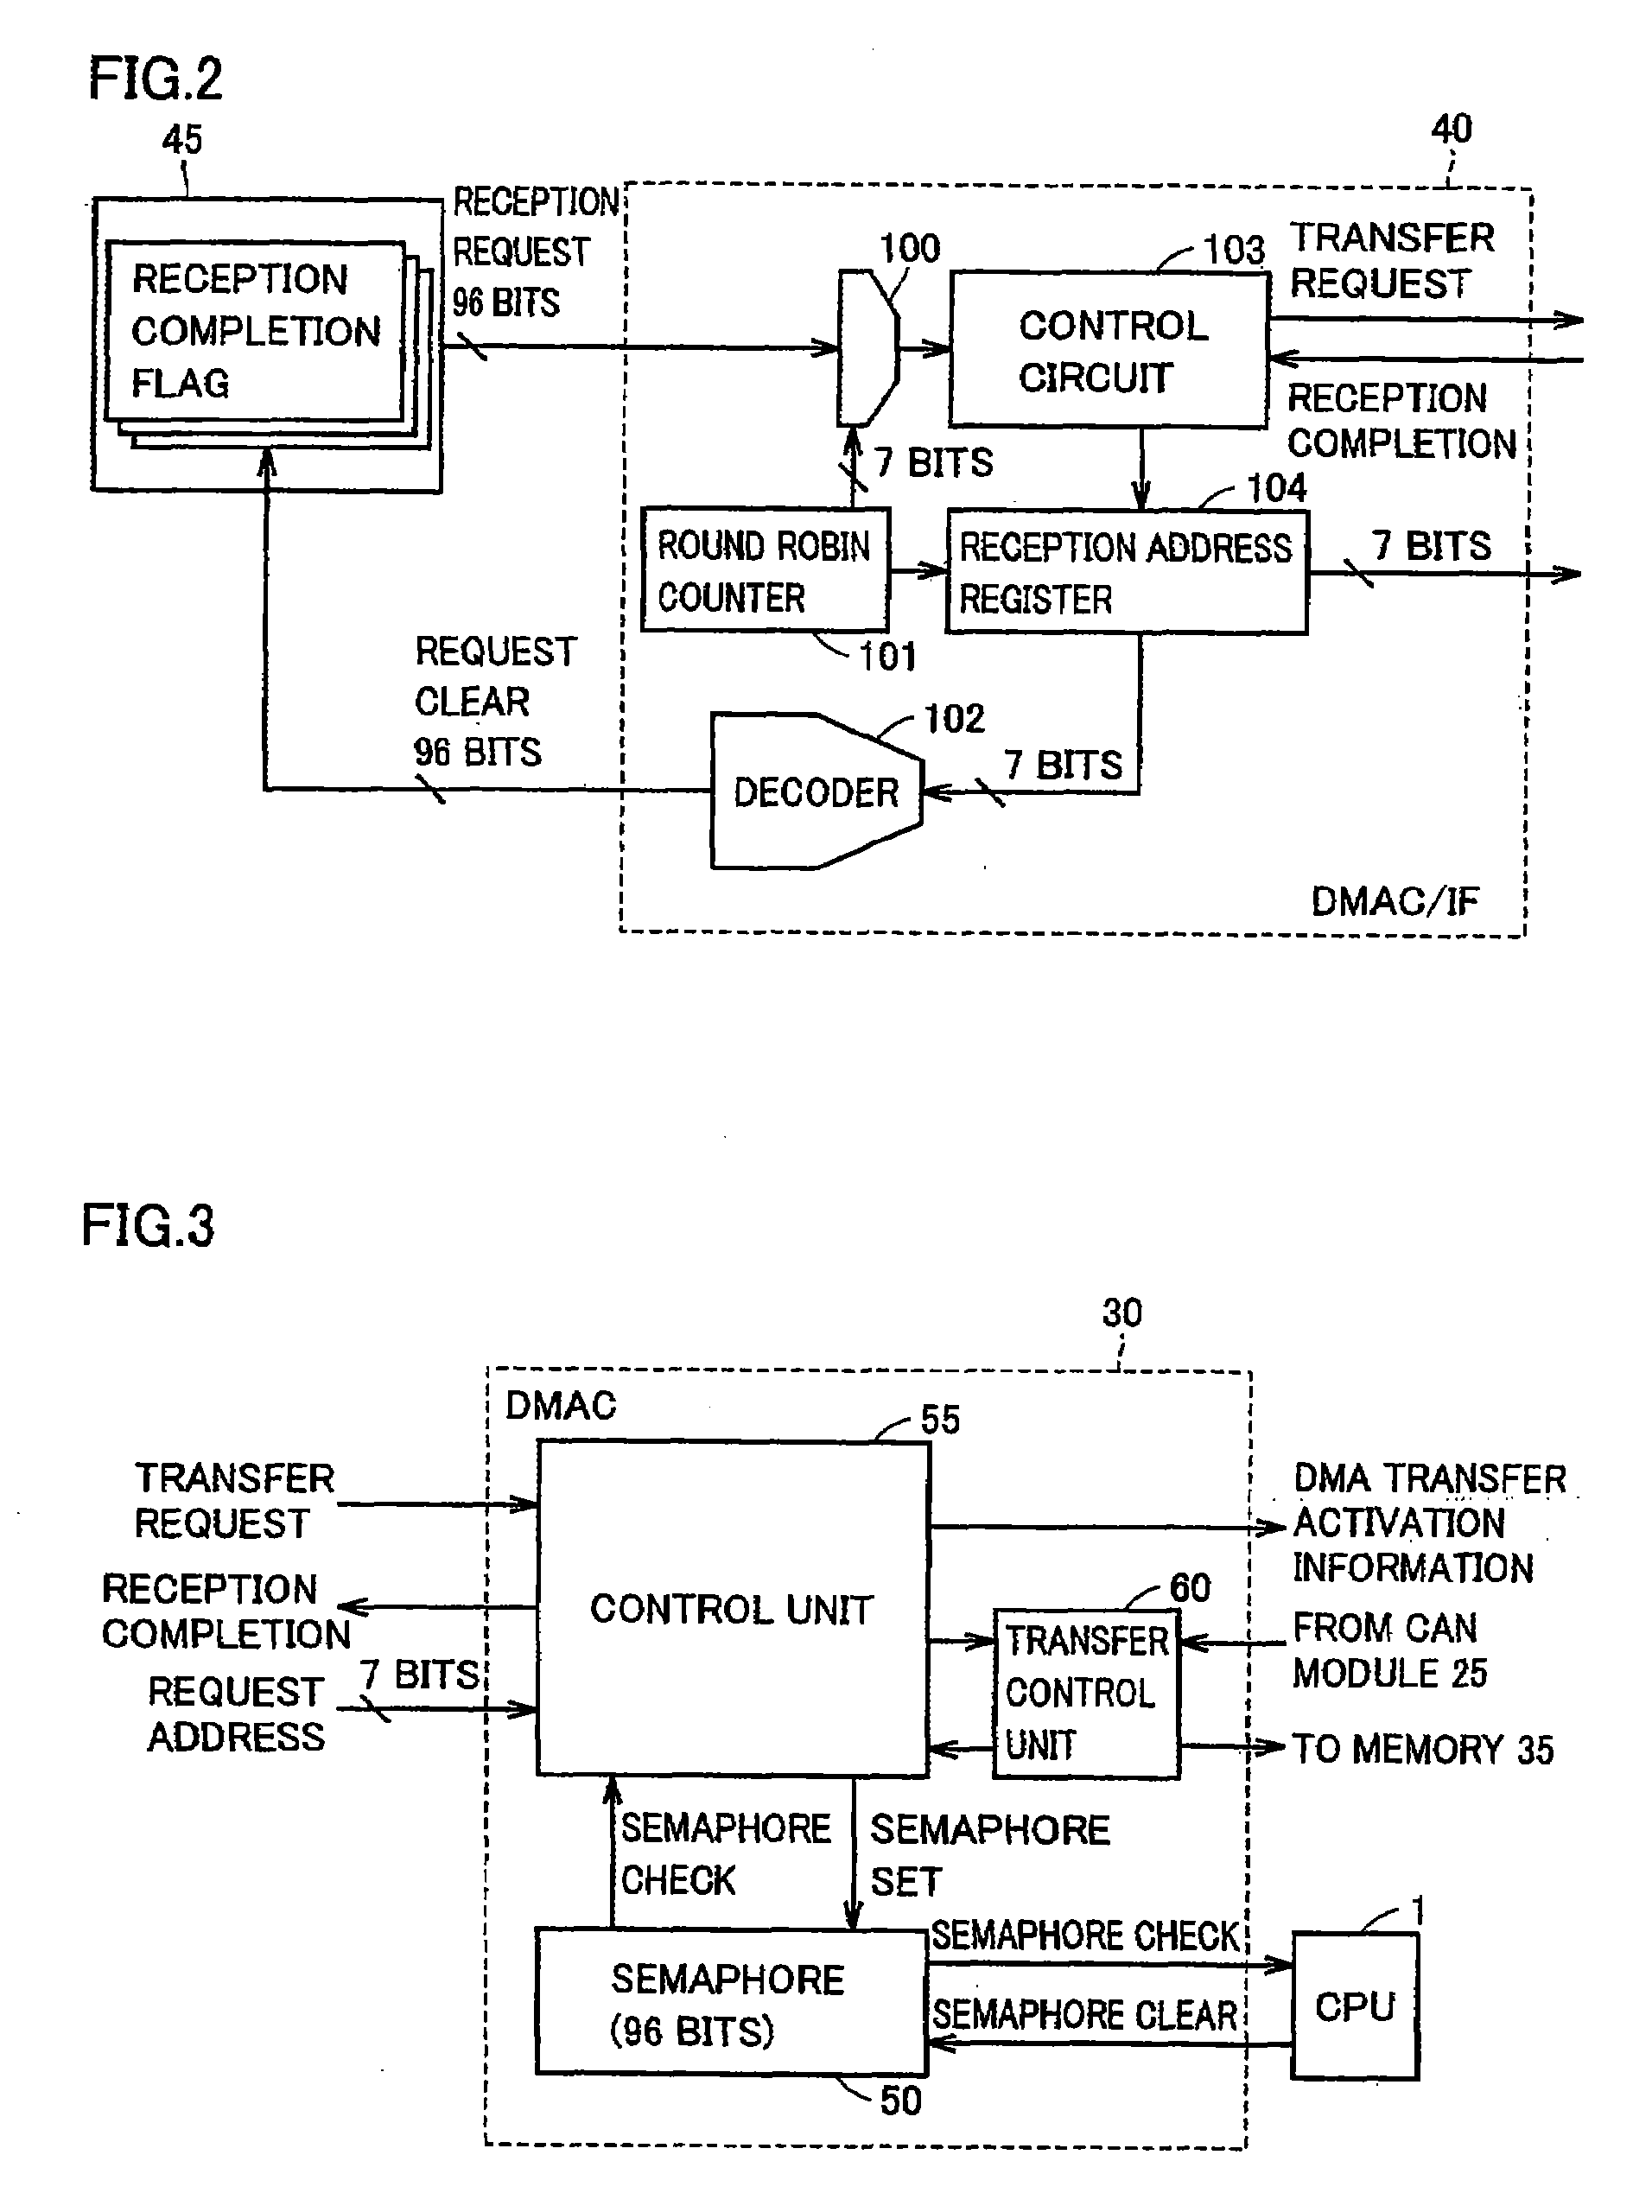 High-speed data readable information processing device